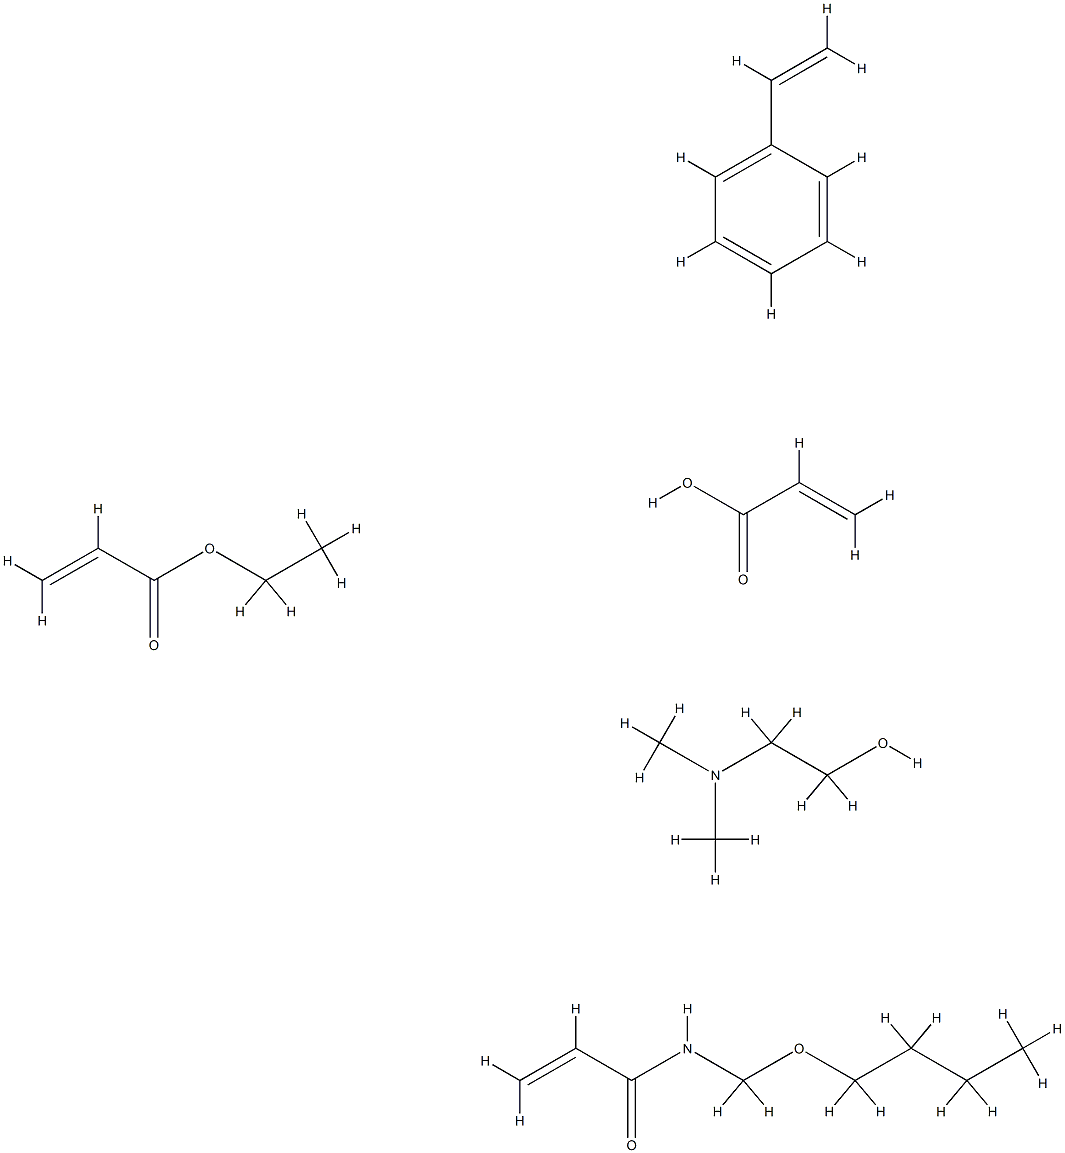 2-Propenoic acid, polymer with N-(butoxymethyl)-2-propenamide, ethenylbenzene and ethyl 2-propenoate, compd. with 2-(dimethylamino)ethanol Struktur